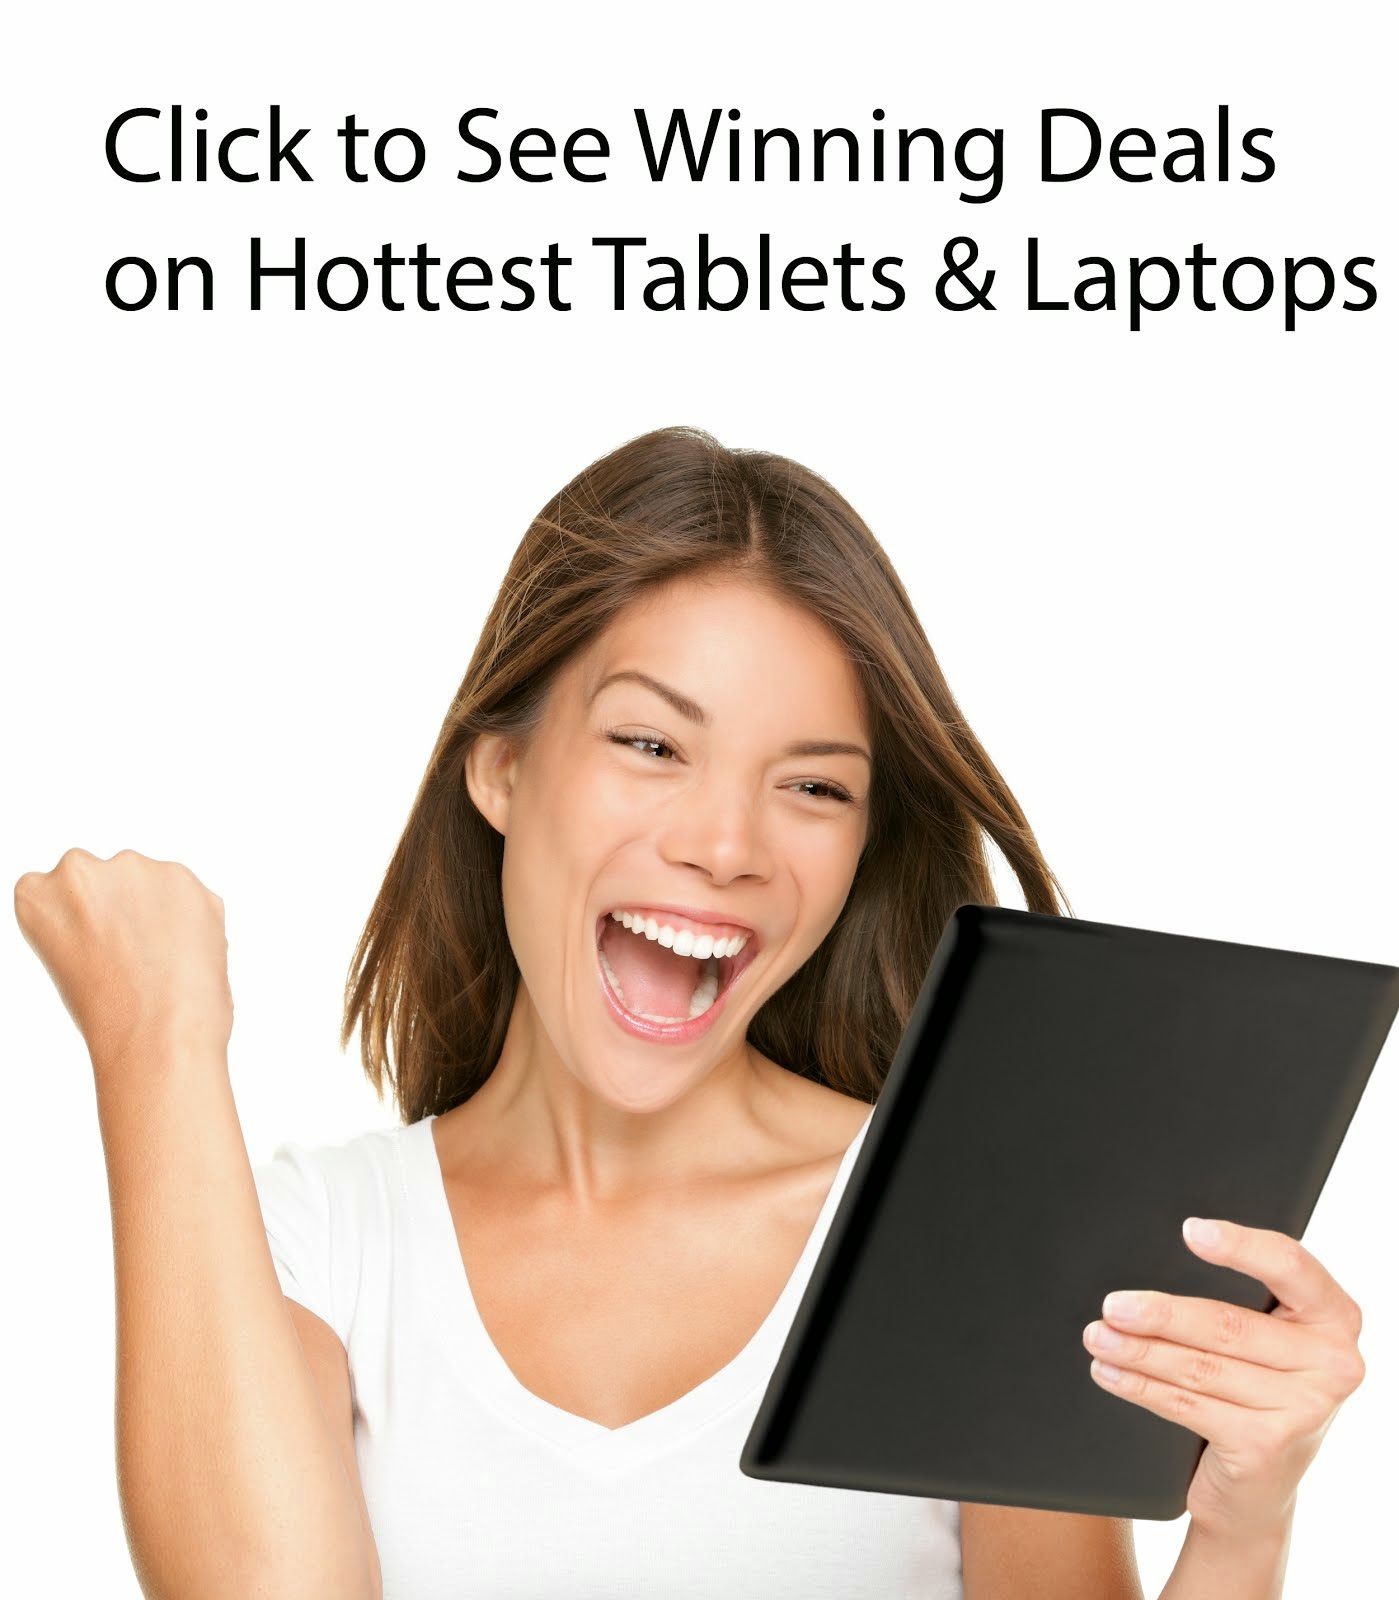 She found exciting deals in top trending Tablets, So Can You!